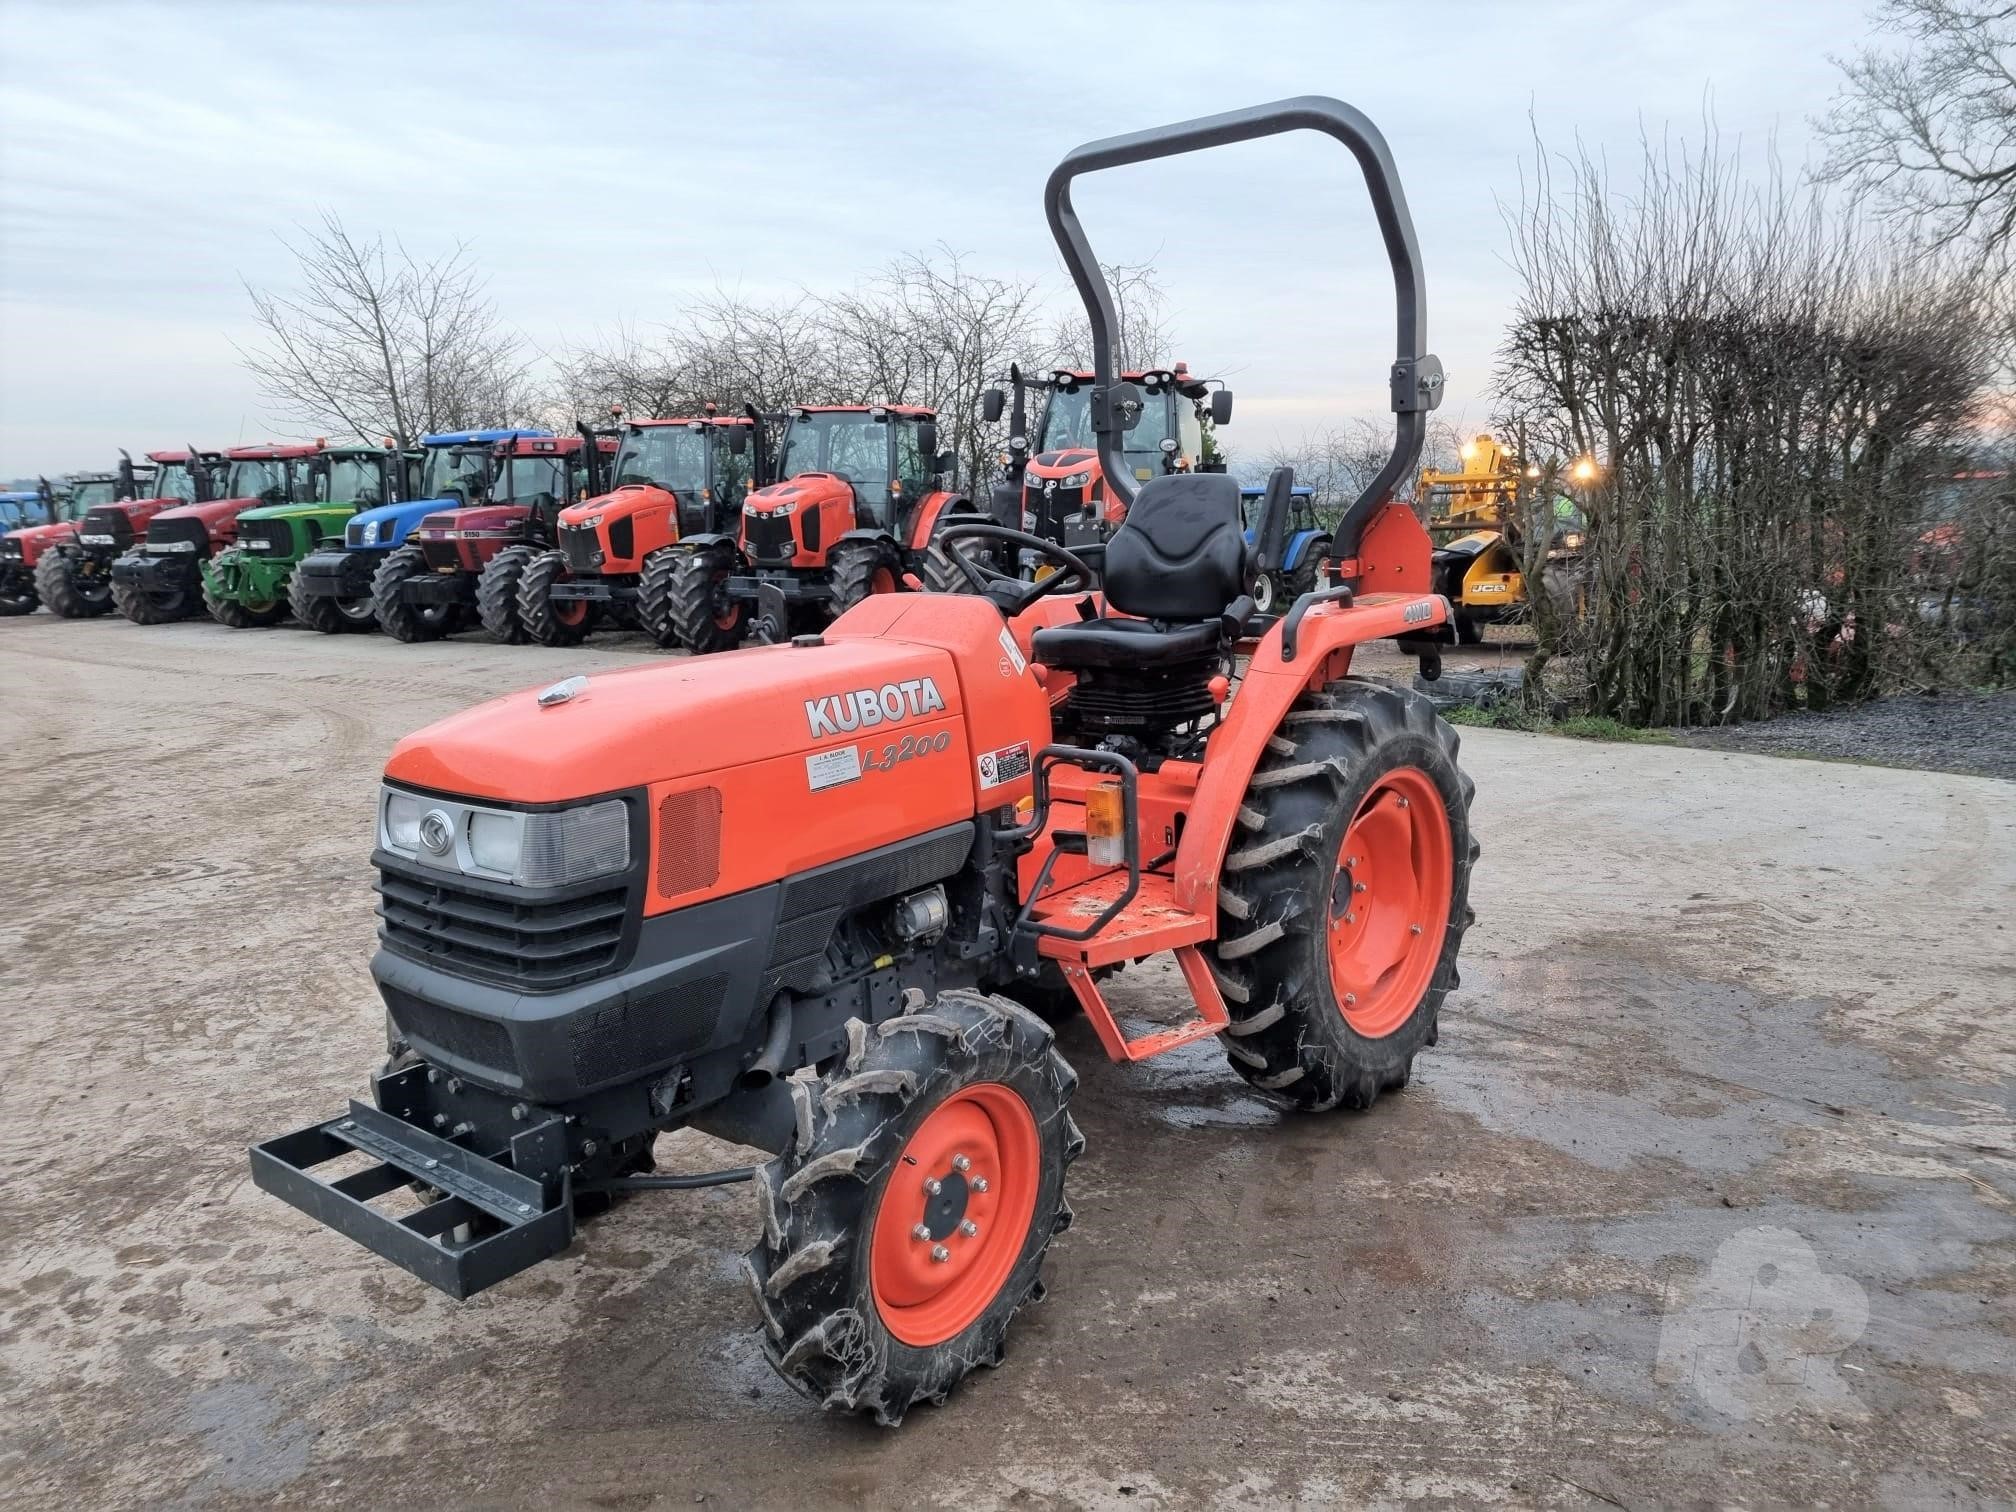 Used Kubota Less Than 40 Hp Tractors For Sale In Ireland 11 Listings Farm And Plant